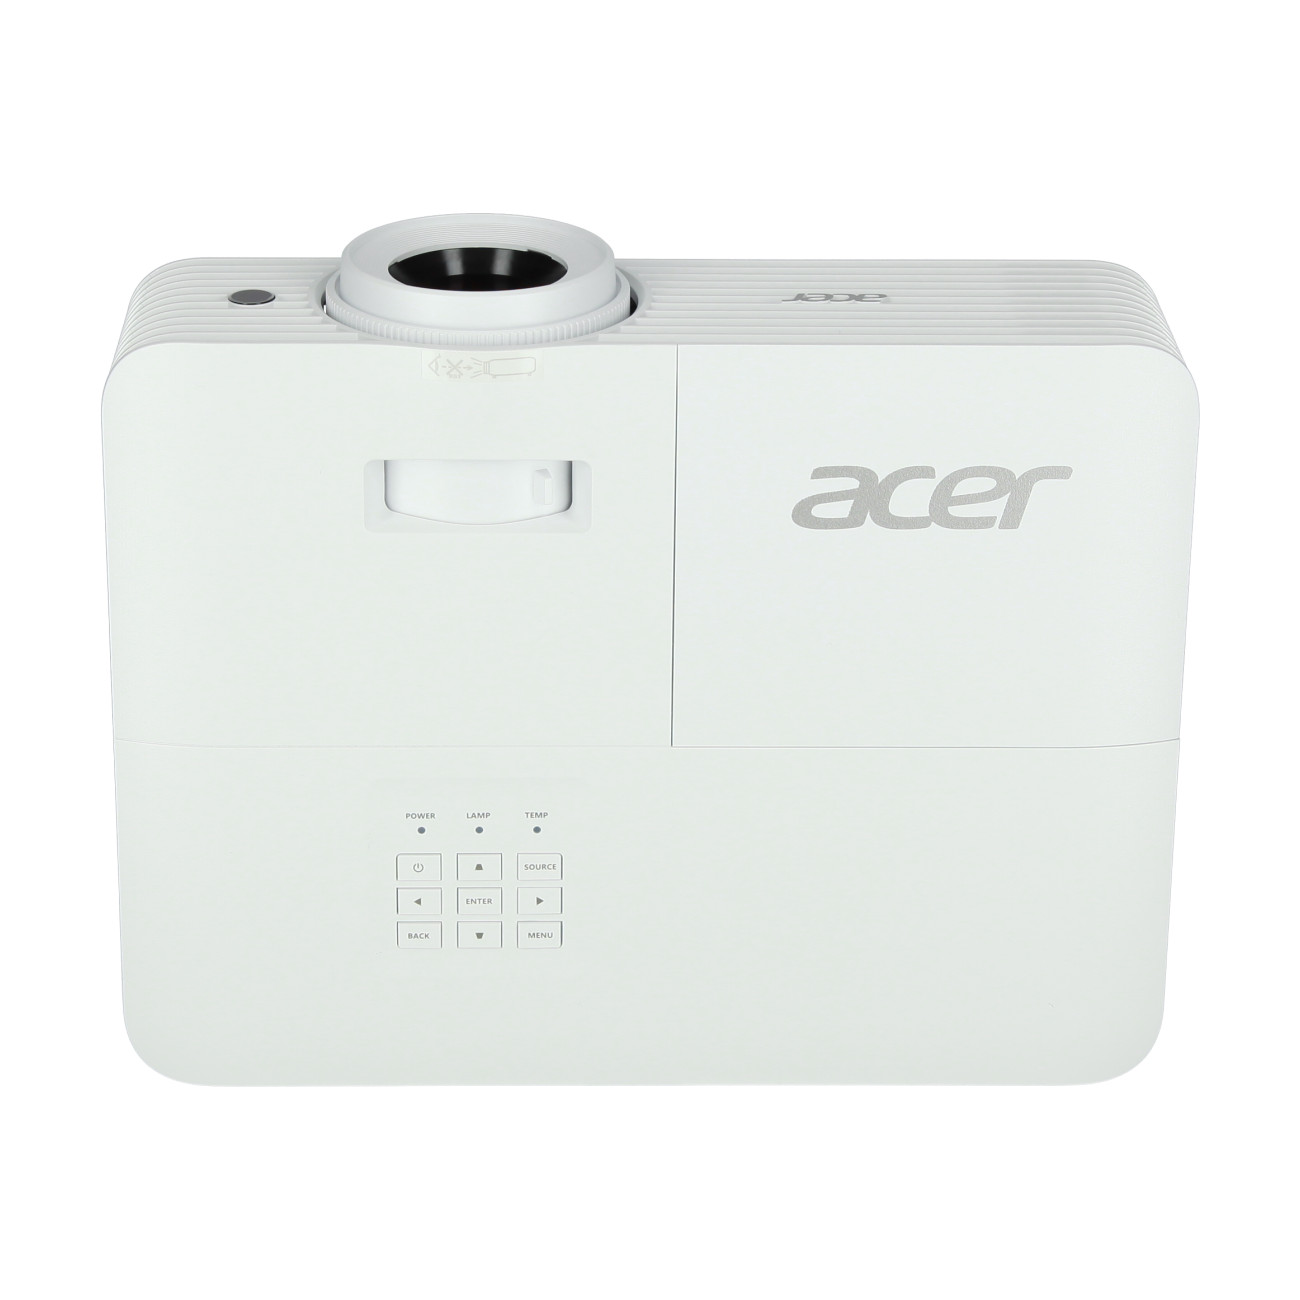 Acer-H6815ATV-Smart-mit-Android-Box-Demoware-Gold